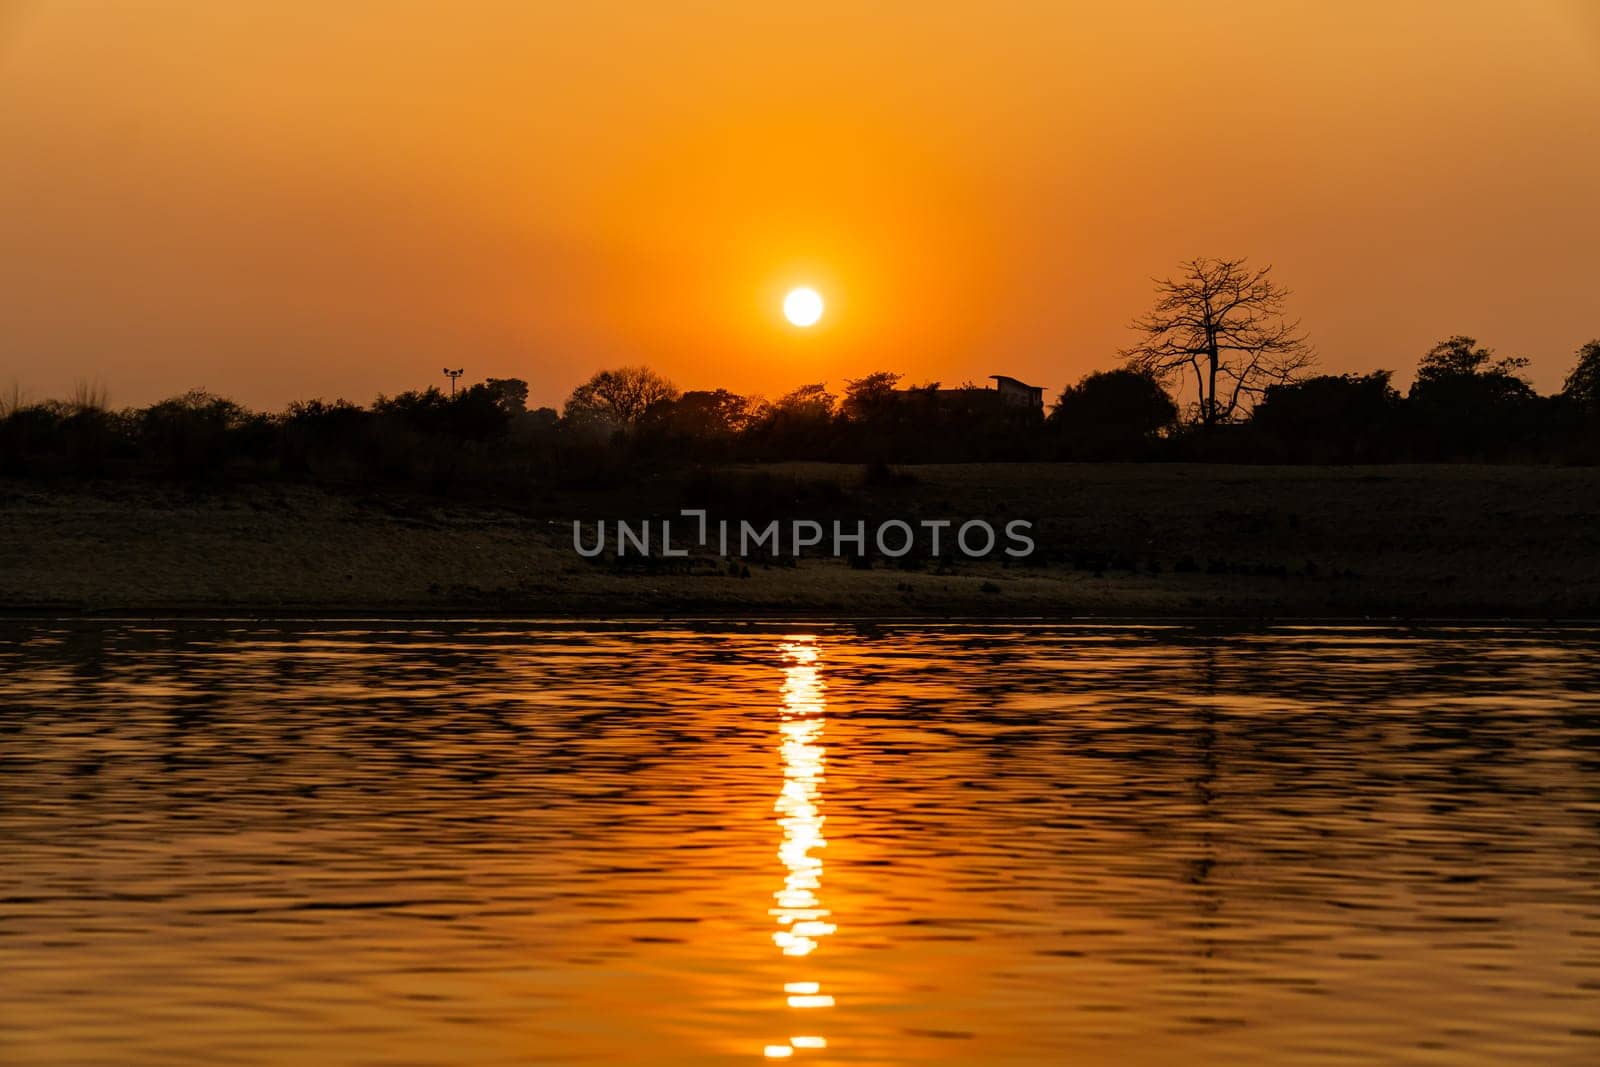 End of the afternoon, Nature, Landscape photo of a river at sunset by abdulkayum97